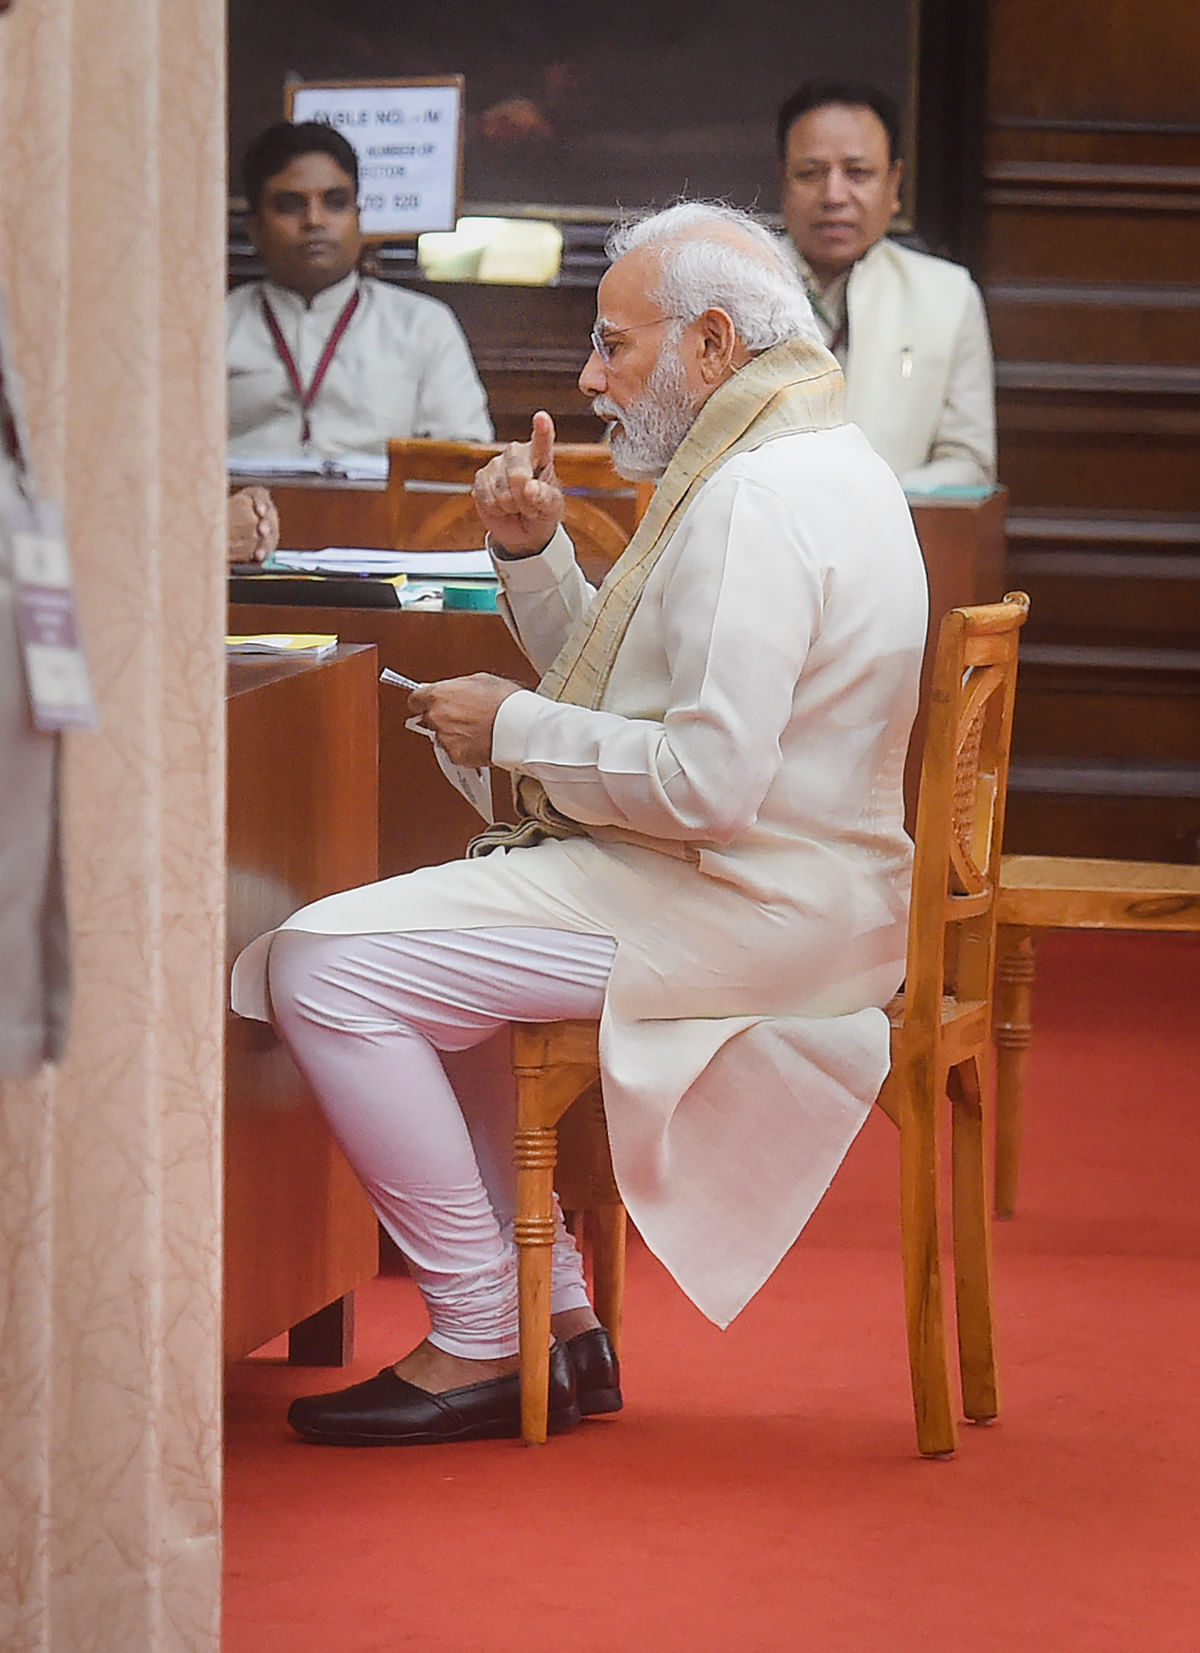 <div class="paragraphs"><p>Prime Minister Narendra Modi casts his vote for the election of the Vice President, at Parliament House in New Delhi, Saturday, 6 August, 2022</p></div>